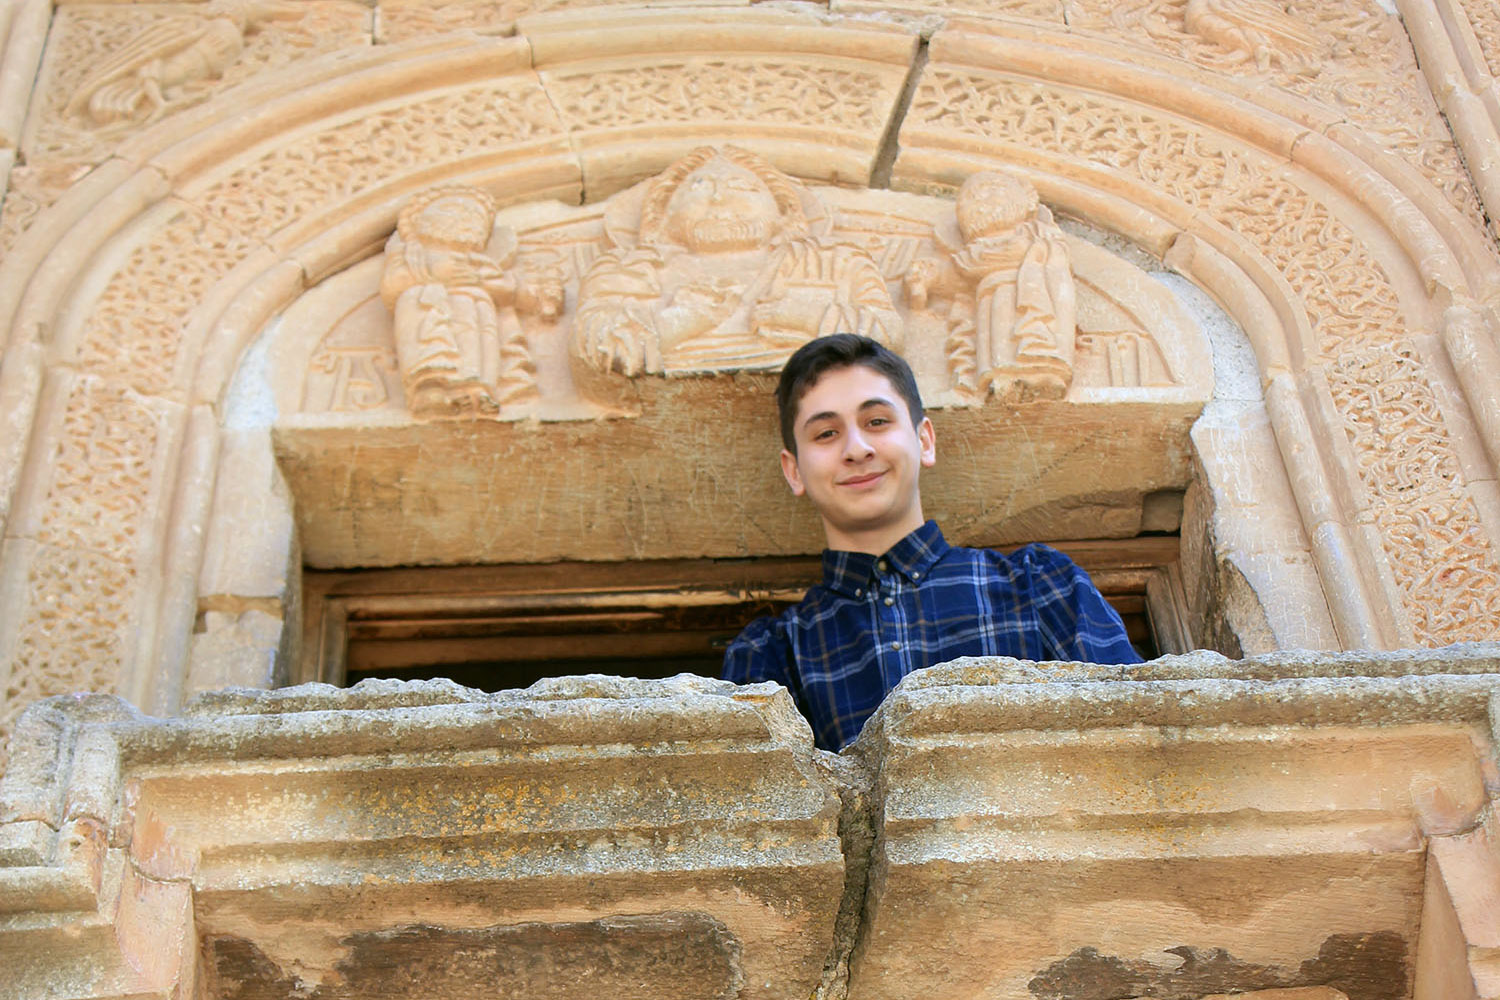 A teenage boy looks down at the camera through an open window of a beige, ornately carved stone monastery.